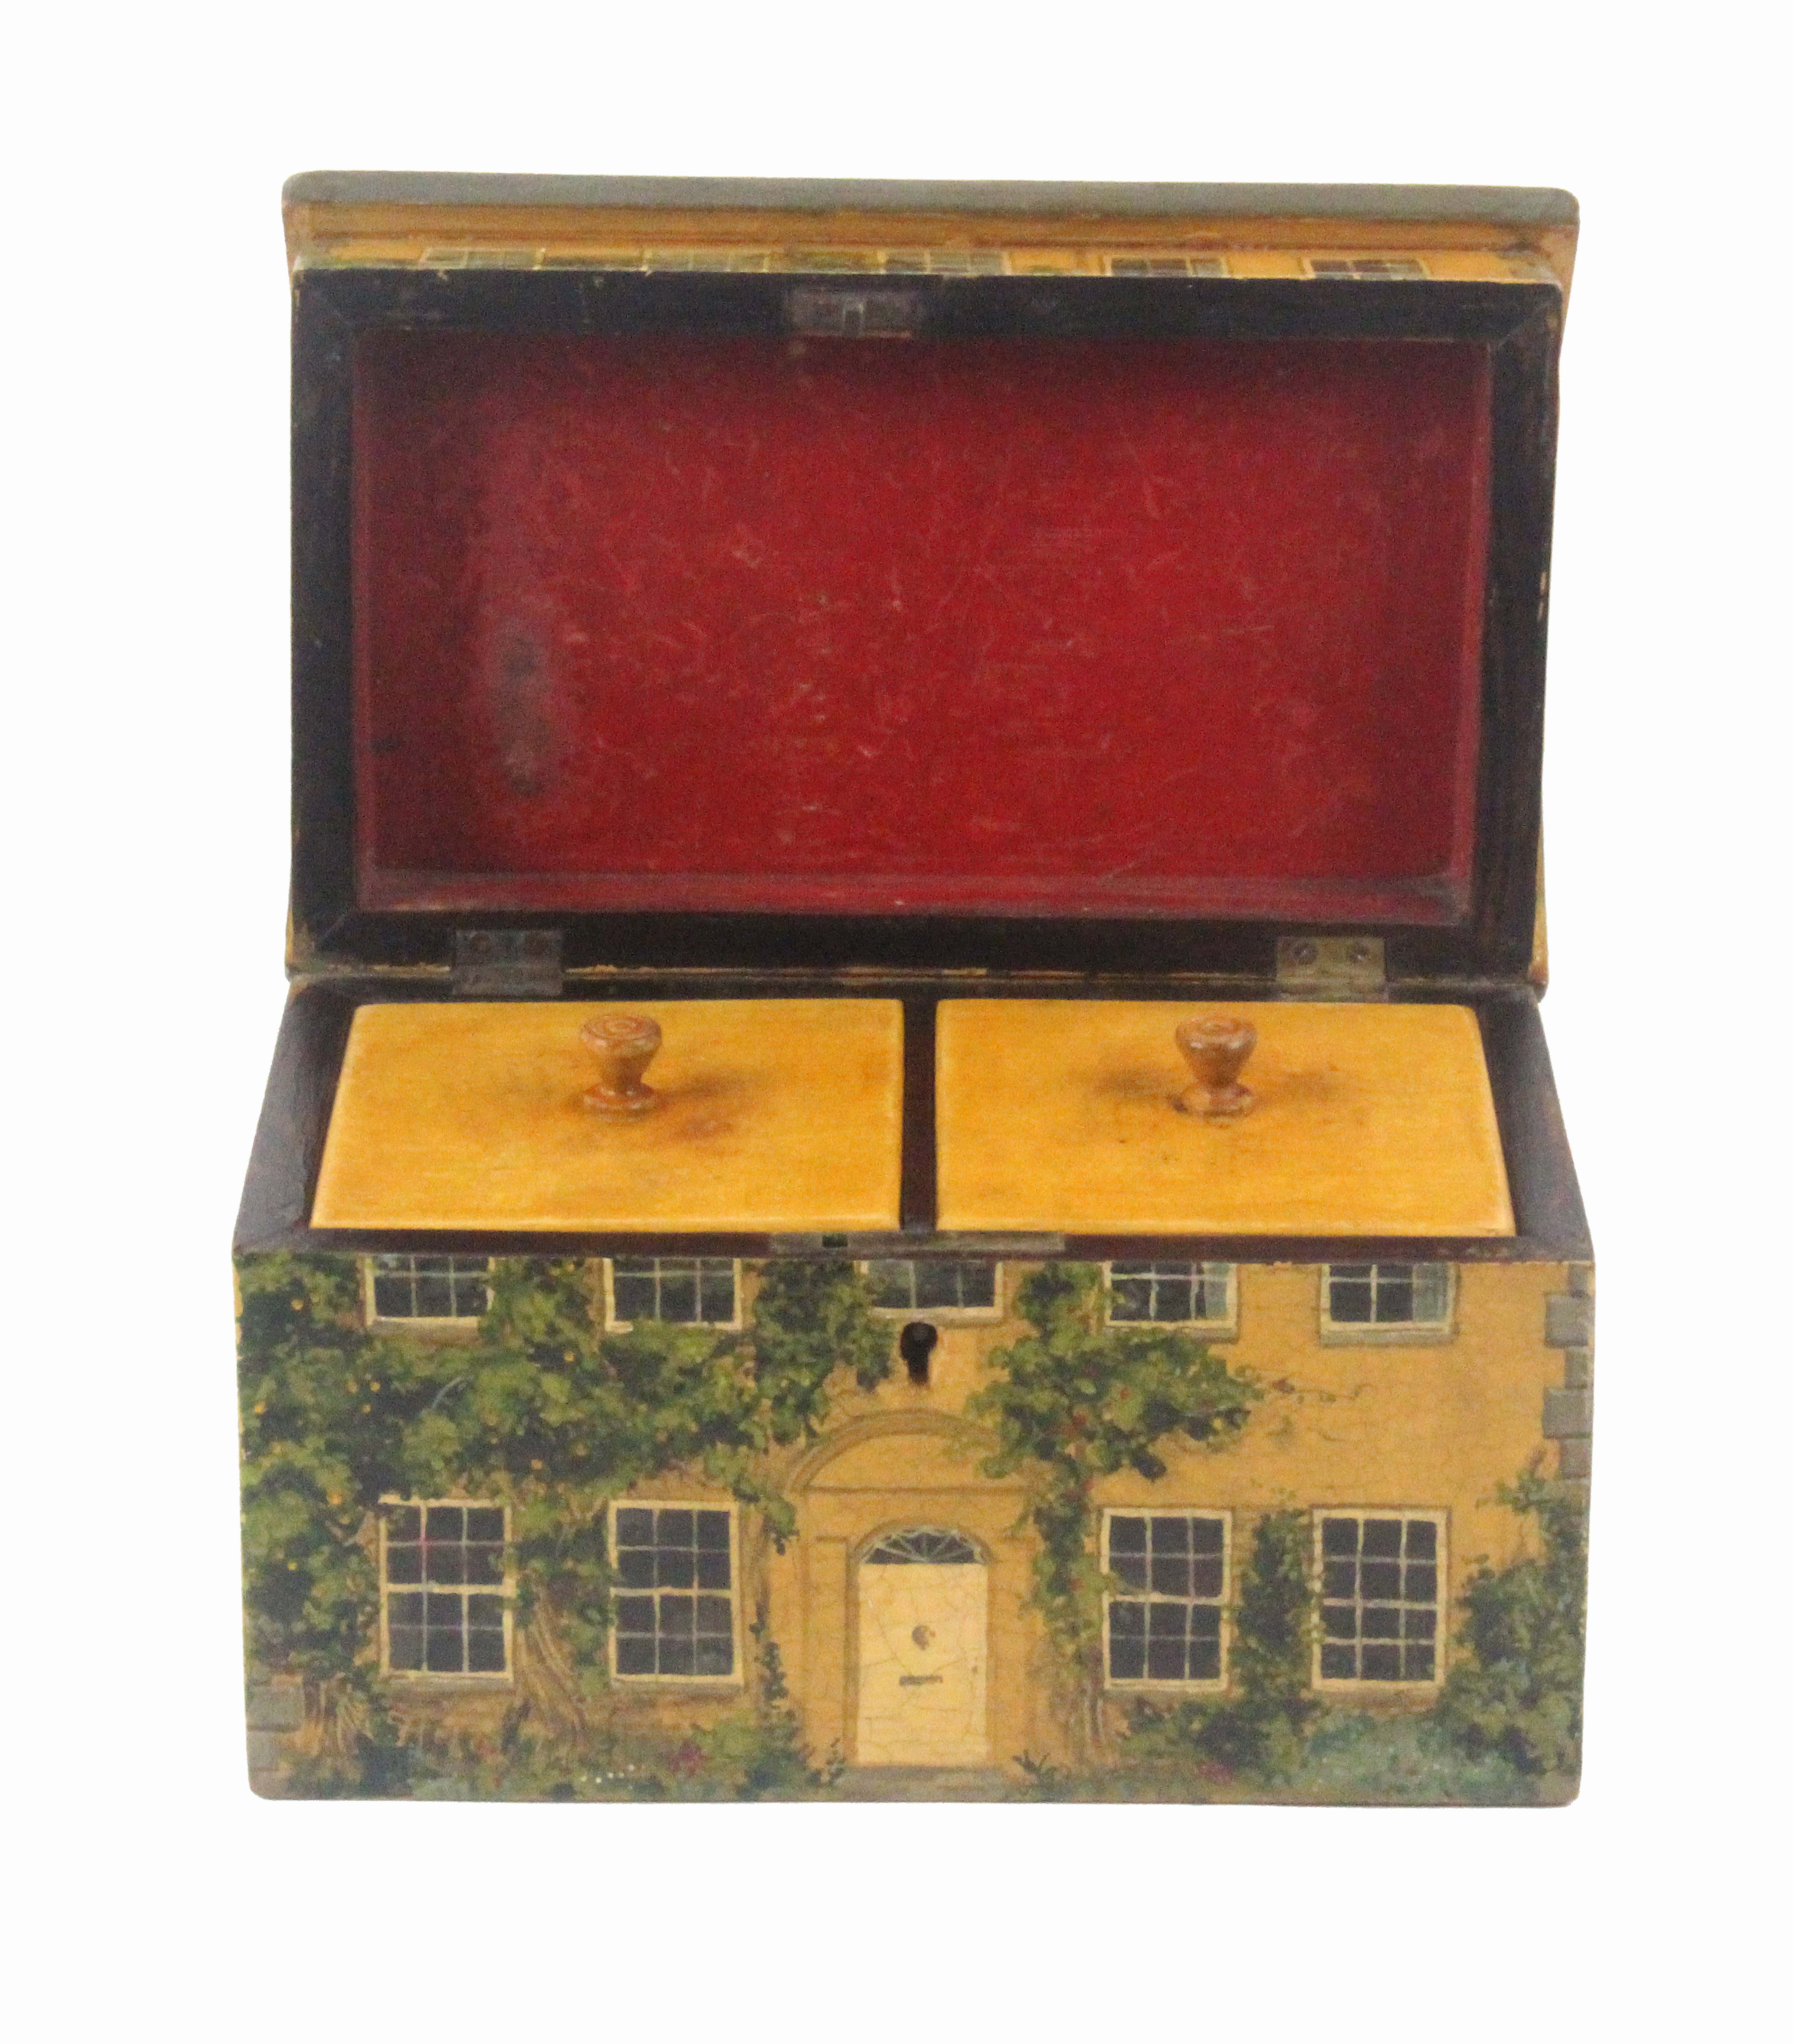 A fake house from Tunbridge ware style tea caddy, 20th Century, the front painted with panelled door - Image 3 of 3